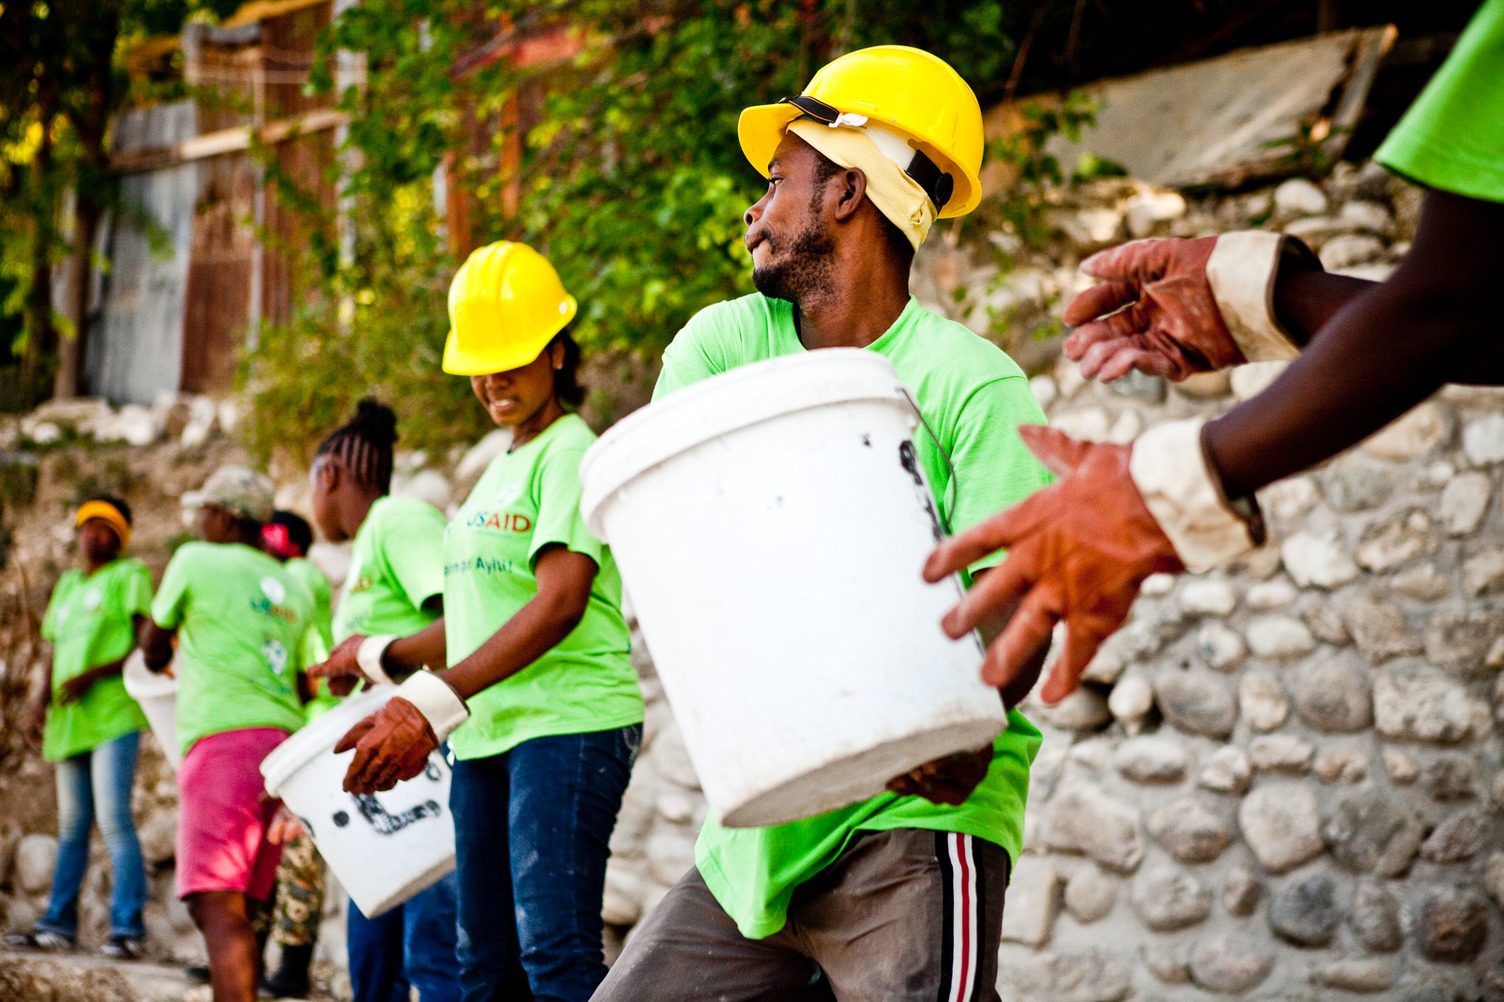 Aid workers respond after the 2010 earthquake in Haiti. © PCI Global